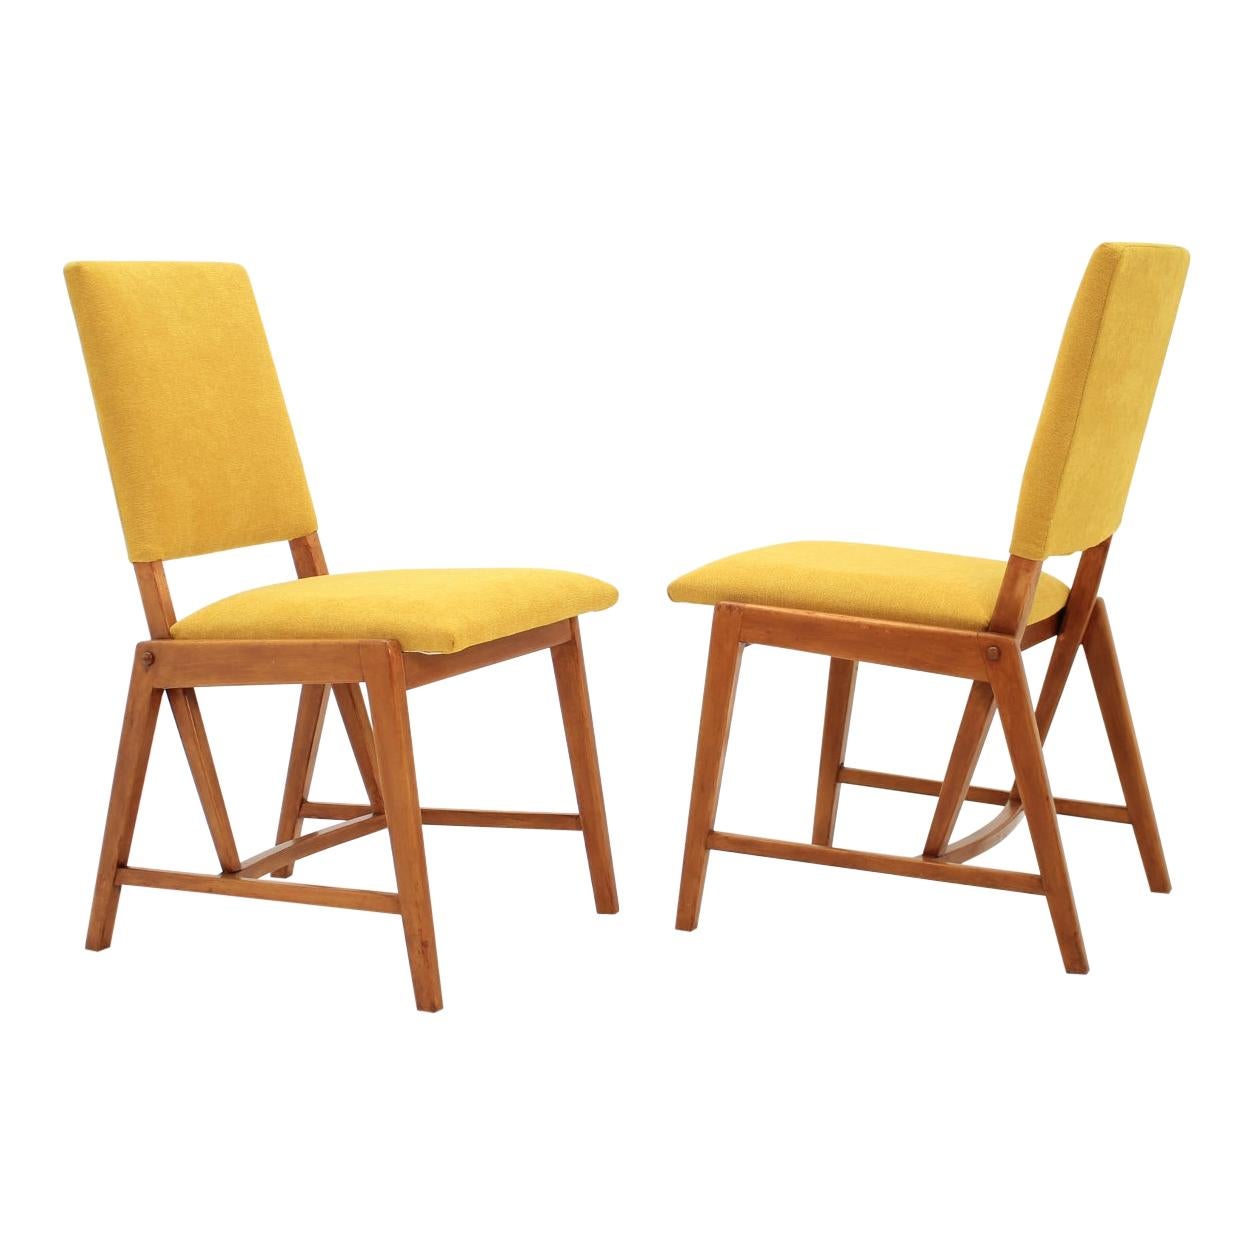 Pair of German Small Design Chairs, 1970s